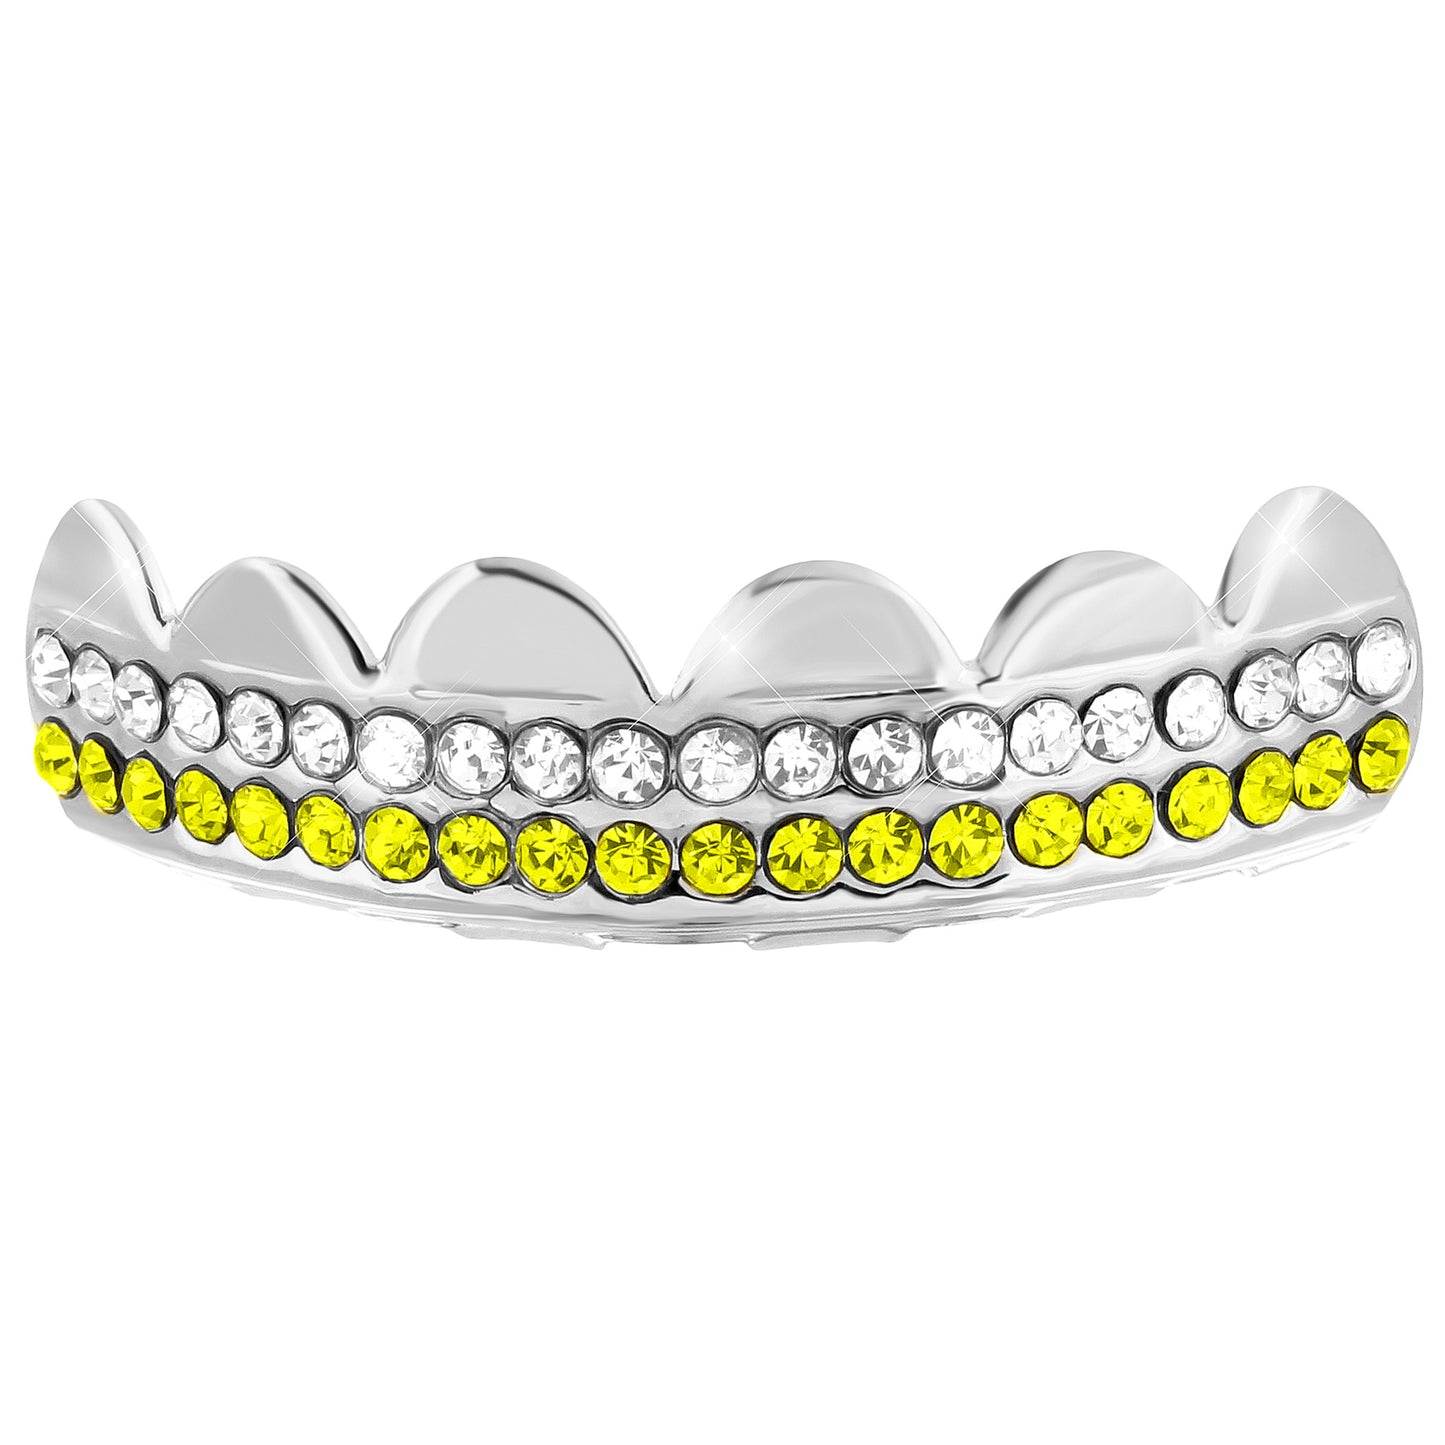 Tooth Grill Top Teeth Grillz Cap 2 Row Blue White Lab Diamonds